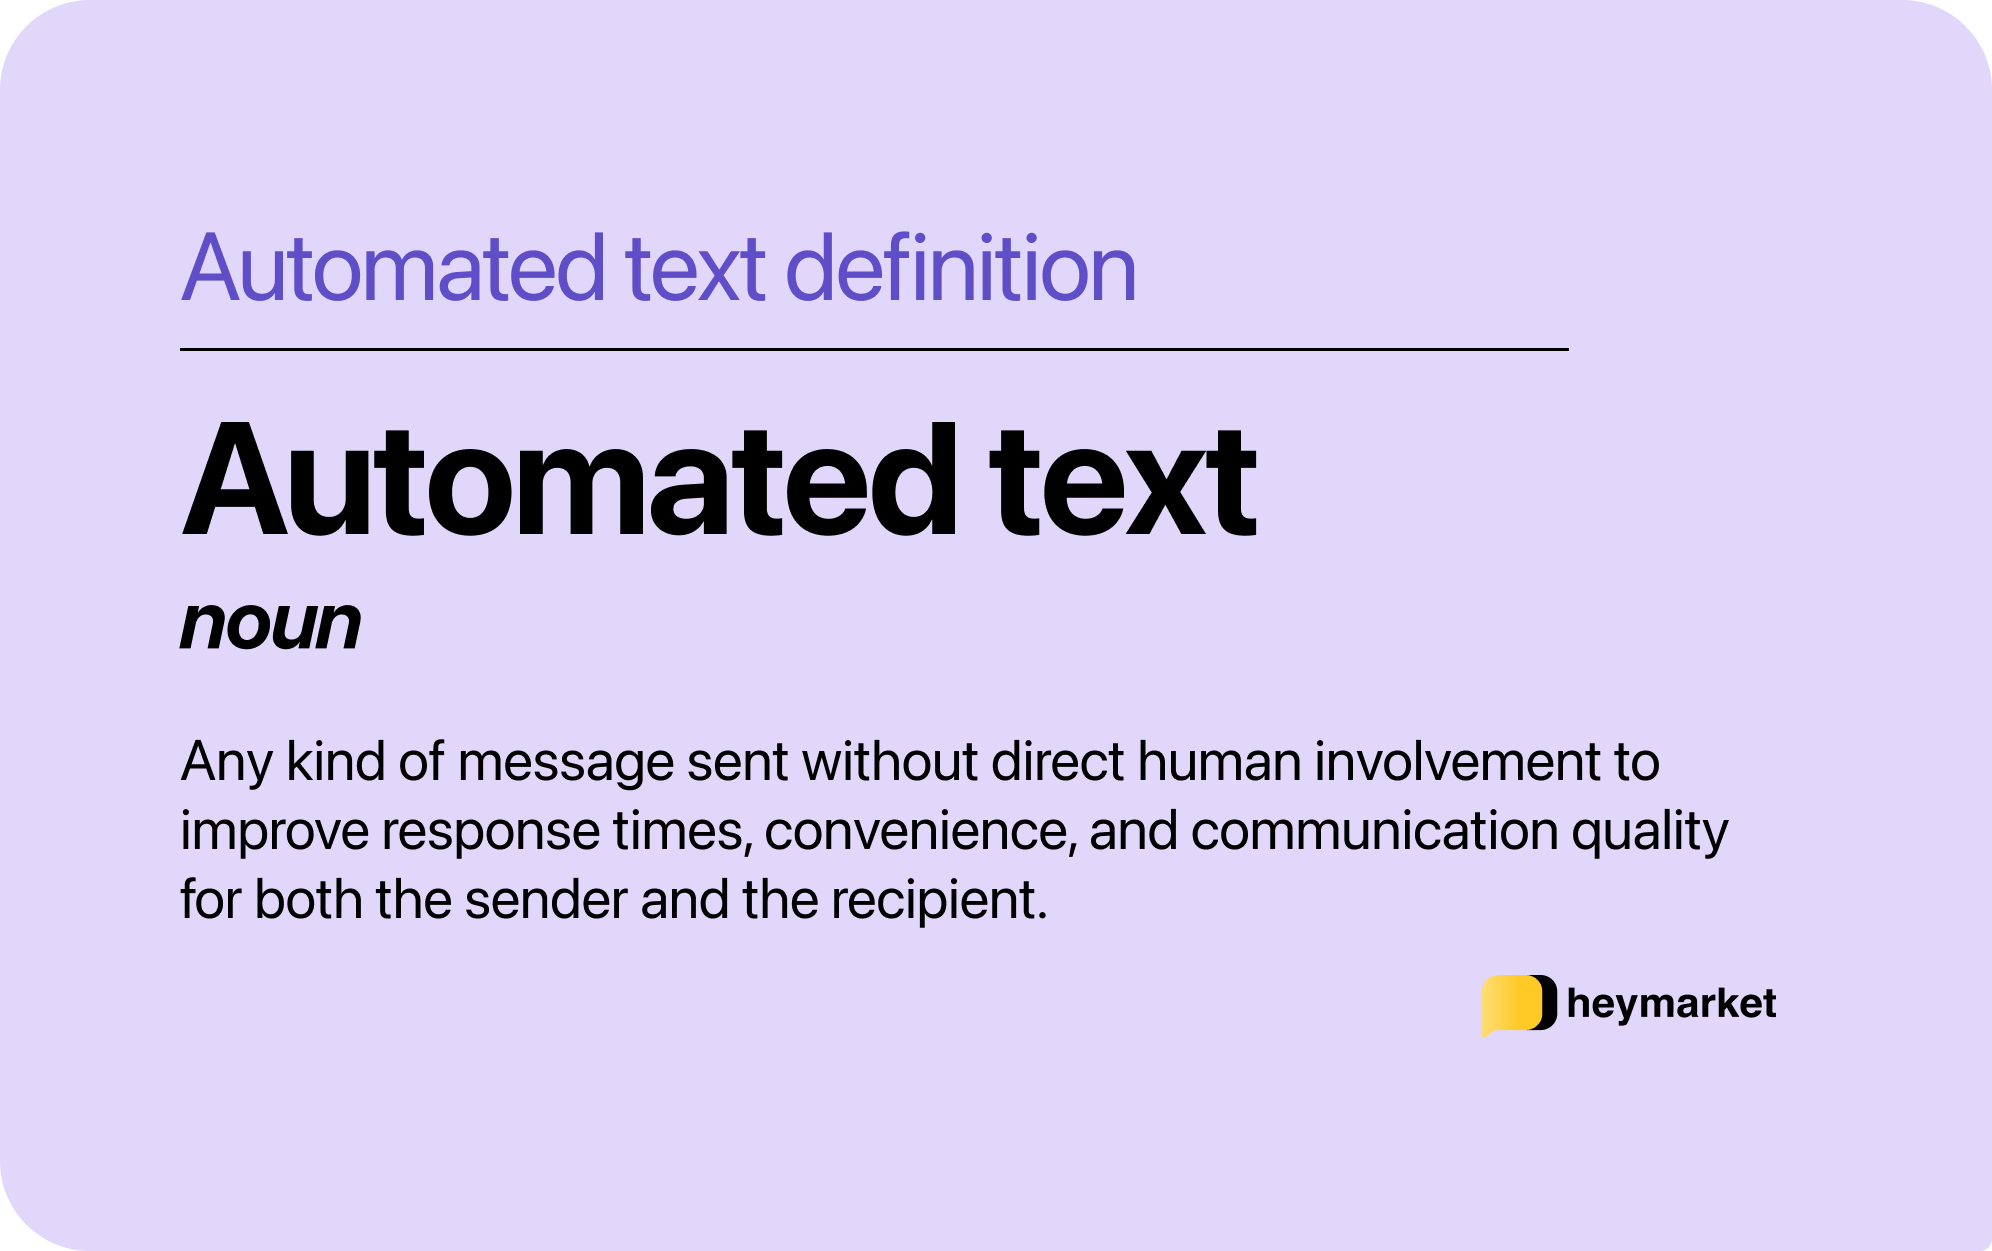 Definition of automated text: Any kind of message sent without direct human involvement to improve response times, convenience, and communication quality for both the sender and recipient